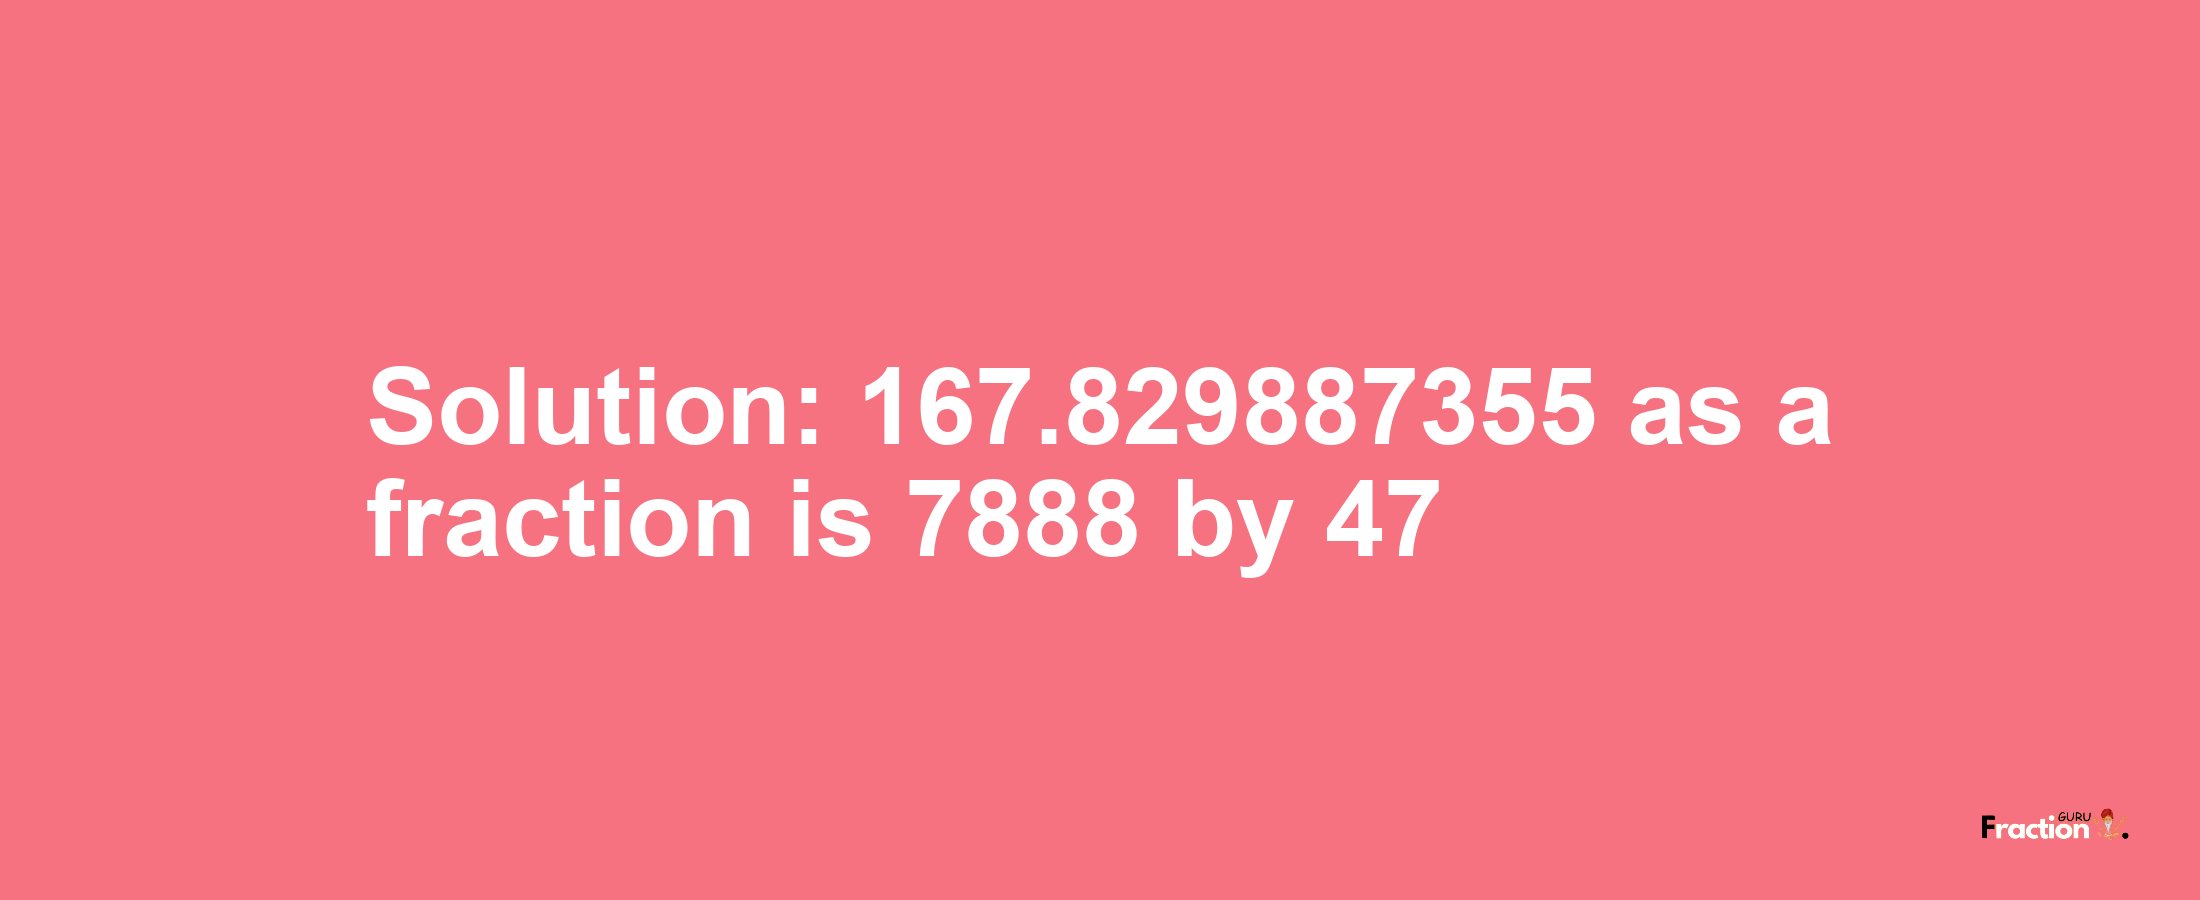 Solution:167.829887355 as a fraction is 7888/47